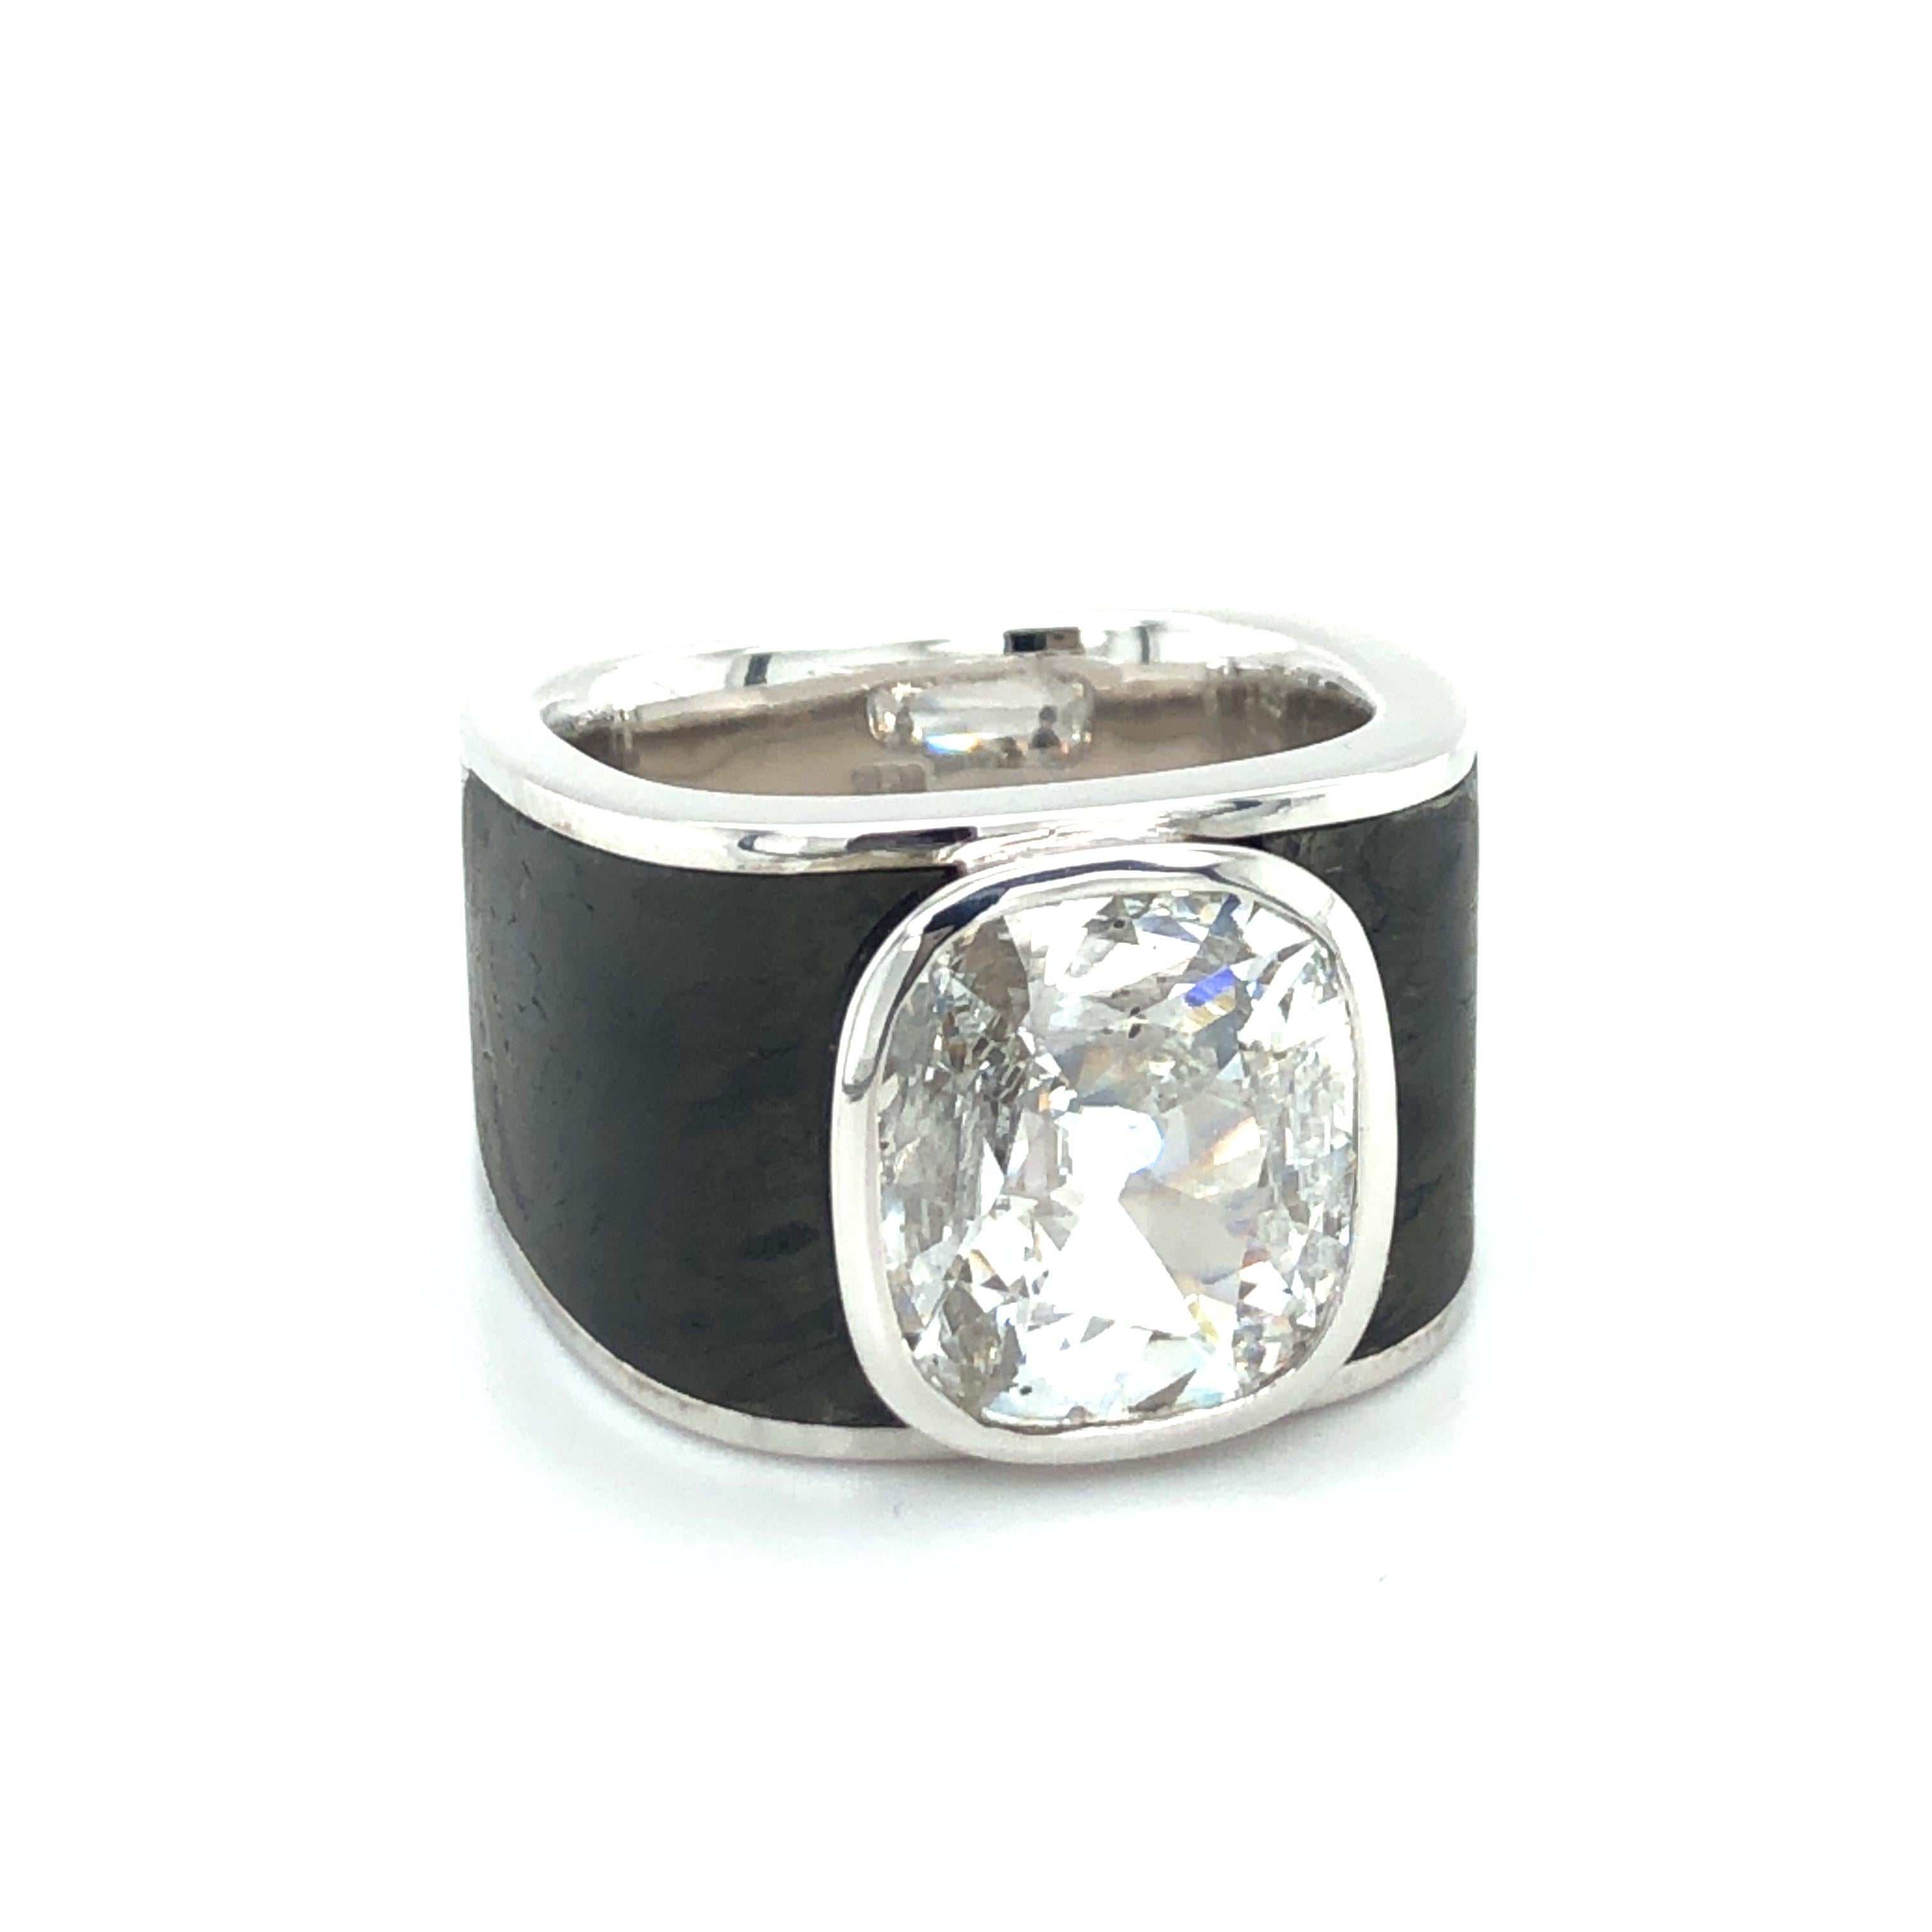 This superb handcrafted ring by renowned Swiss jeweller BINDER MOERISCH features a stunning, 3.41 carat cushion shaped diamond of D colour and si2 clarity.
Bezel set in a bold mounting made of 18 karat white gold and finely structured black carbon,